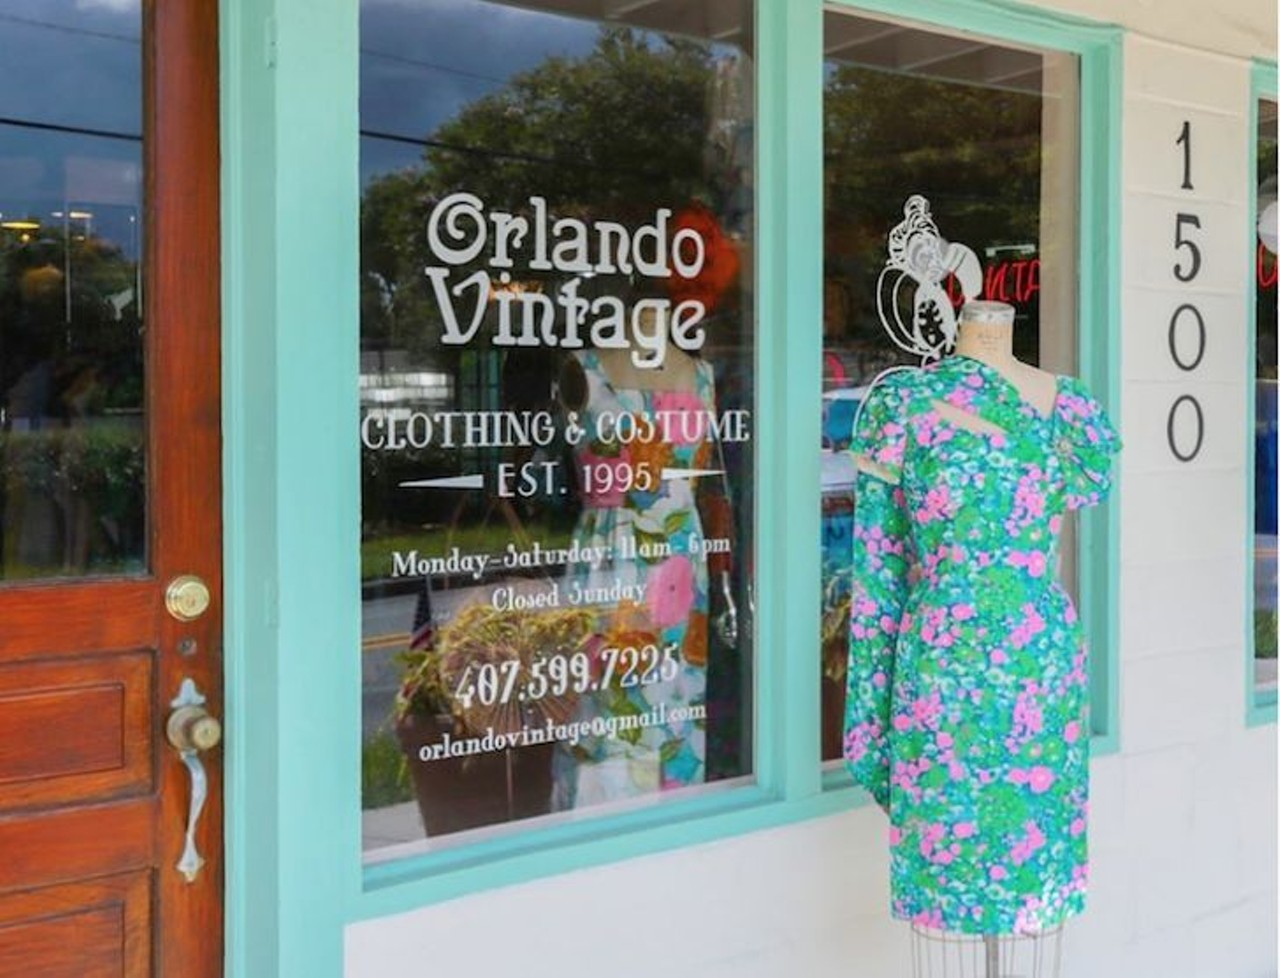 Orlando Vintage Clothing and Costumes
1500 Formosa Ave., 407-599-7225 
One of the more glamorous consignment stores, Orlando Vintage is ideal for vintage lovers who wish they lived in a period drama.
Photo via Orlando Vintage Clothing and Costumes/Facebook